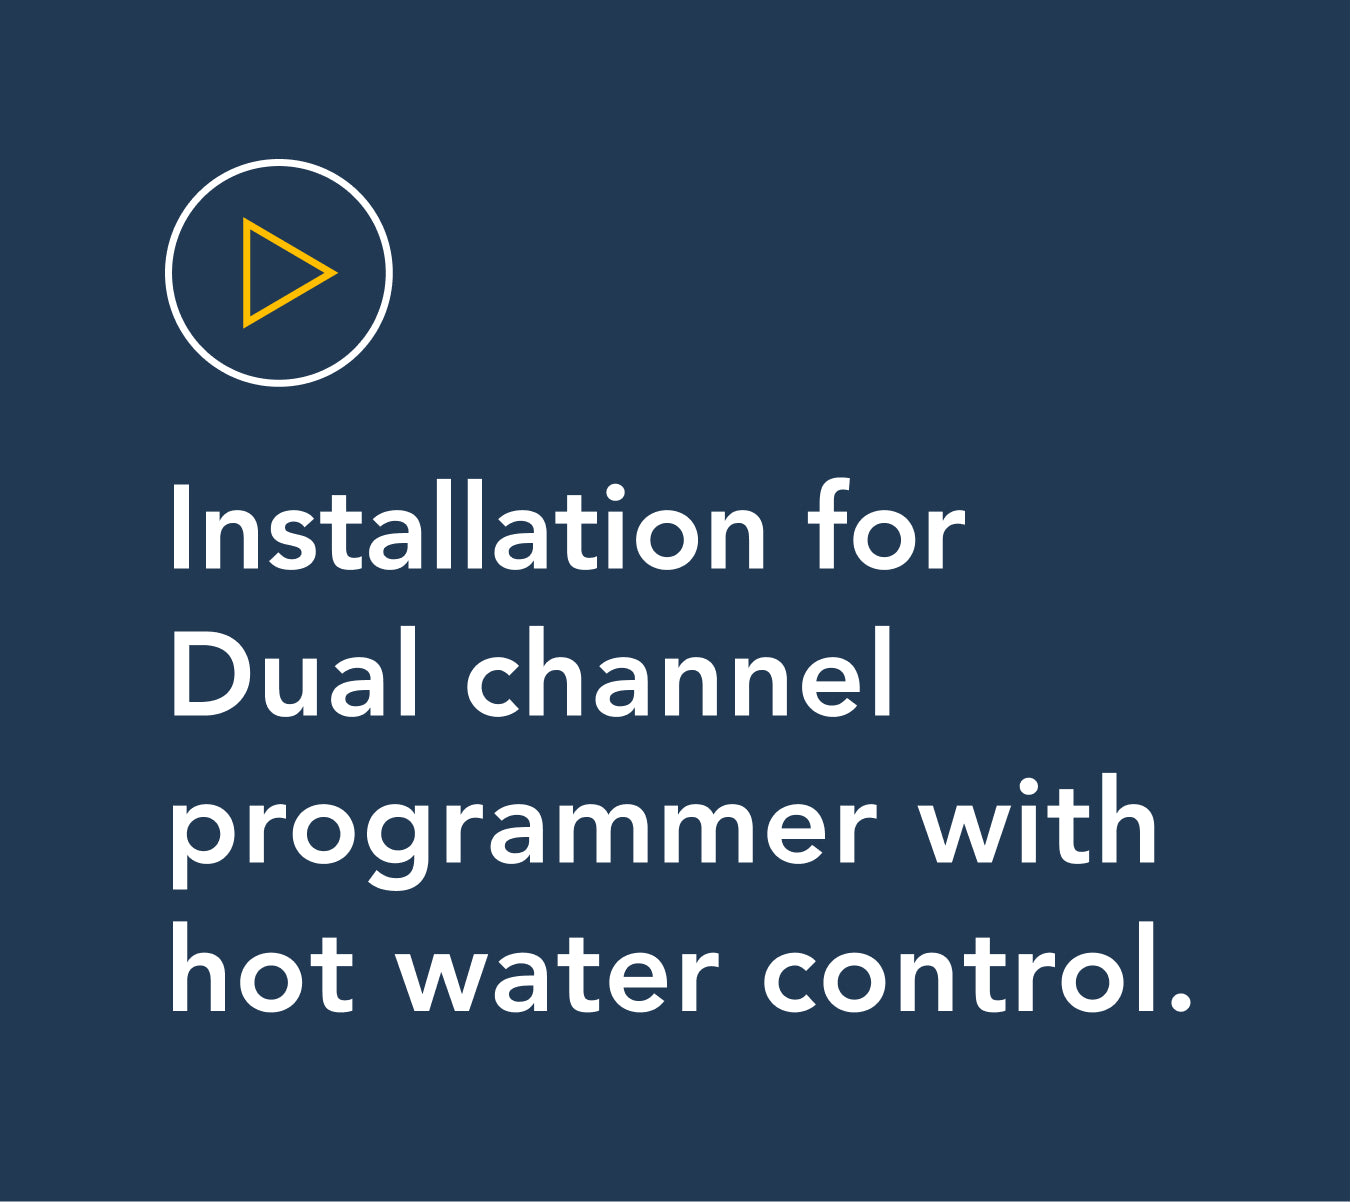 Wireless Smart Thermostat - S&Y plan installation video Dual channel programmer with hot water control